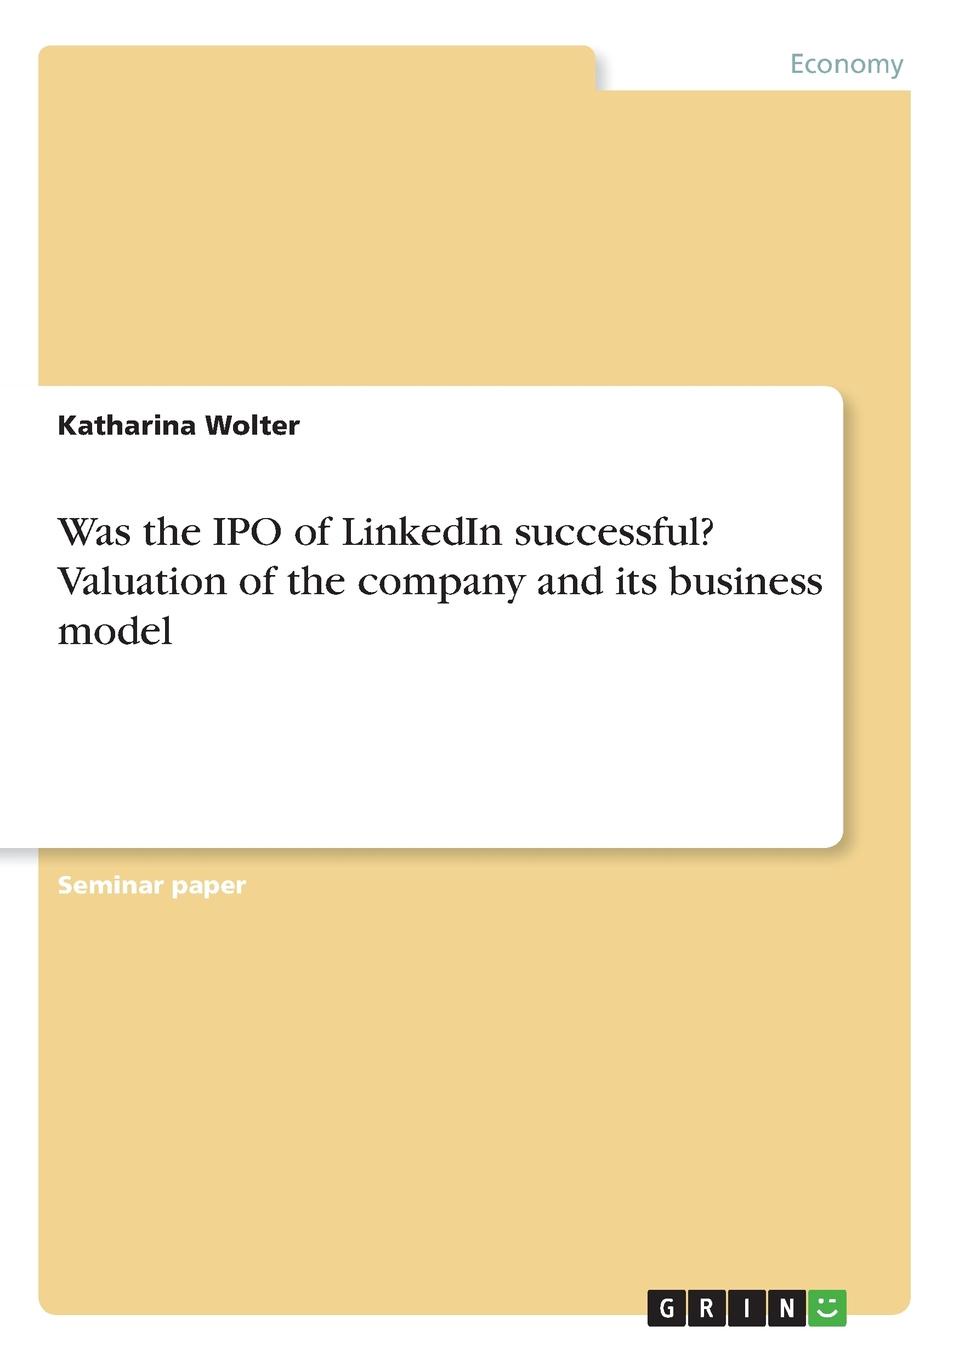 Was the IPO of LinkedIn successful. Valuation of the company and its business model